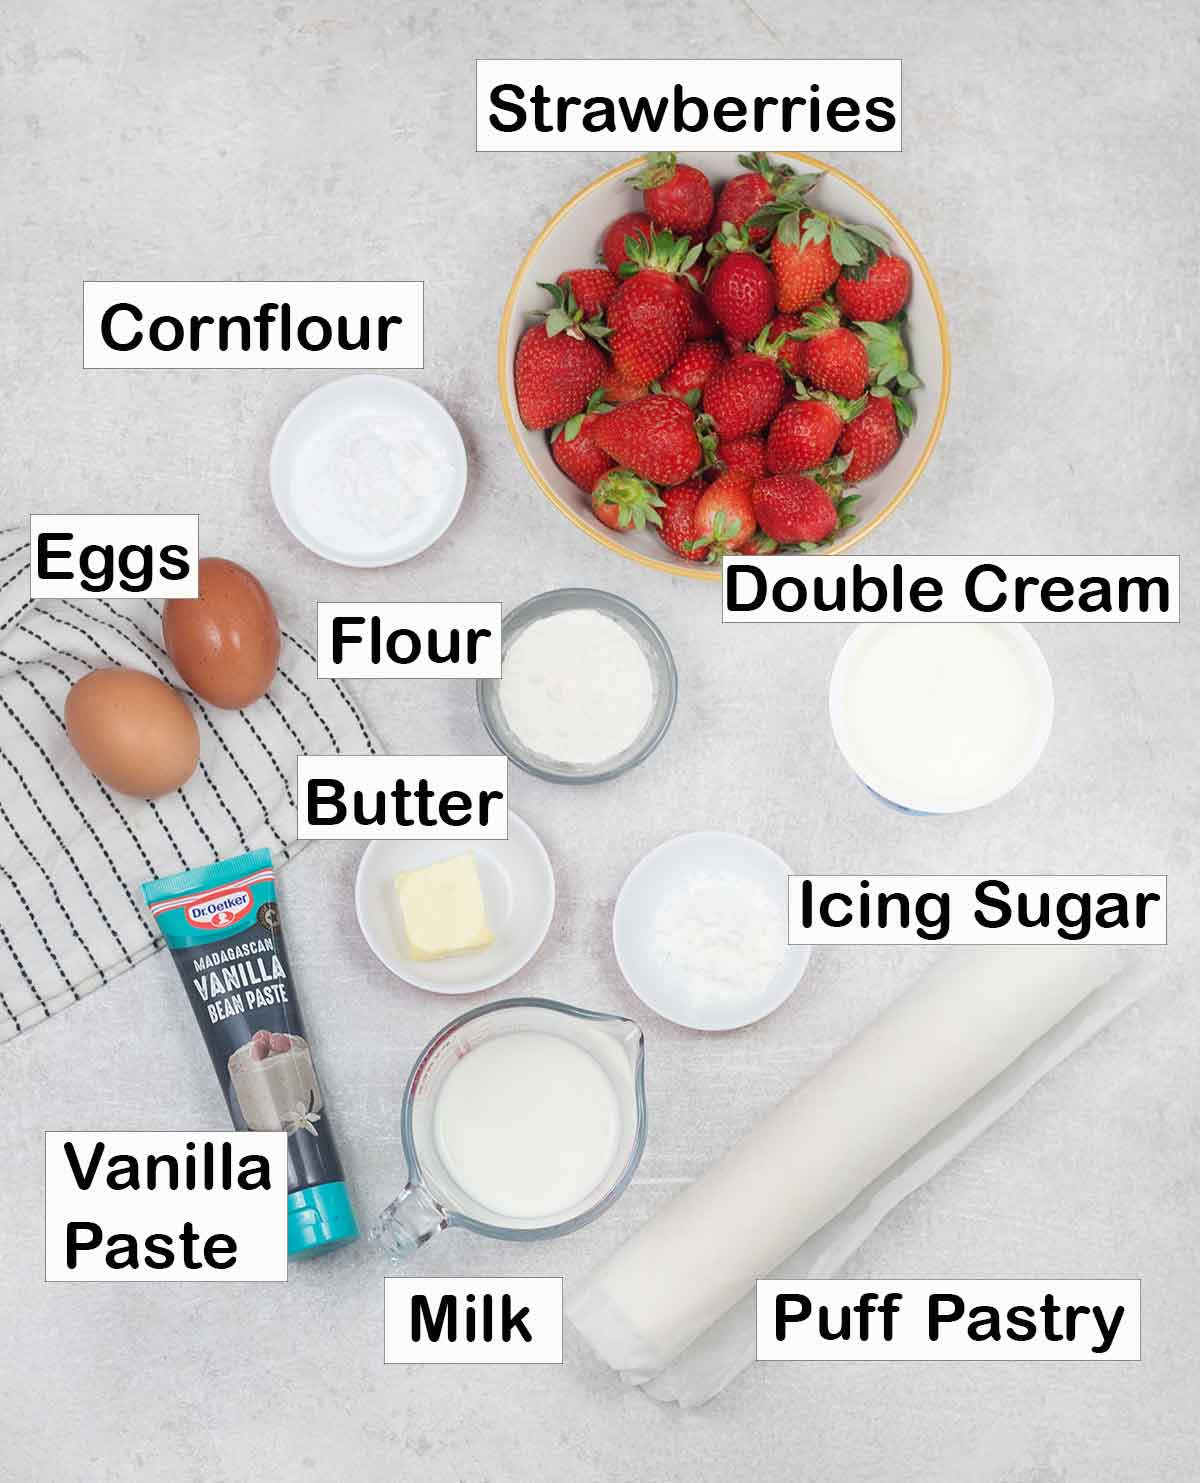 Labeled ingredients for making Strawberry Mille Feuille.